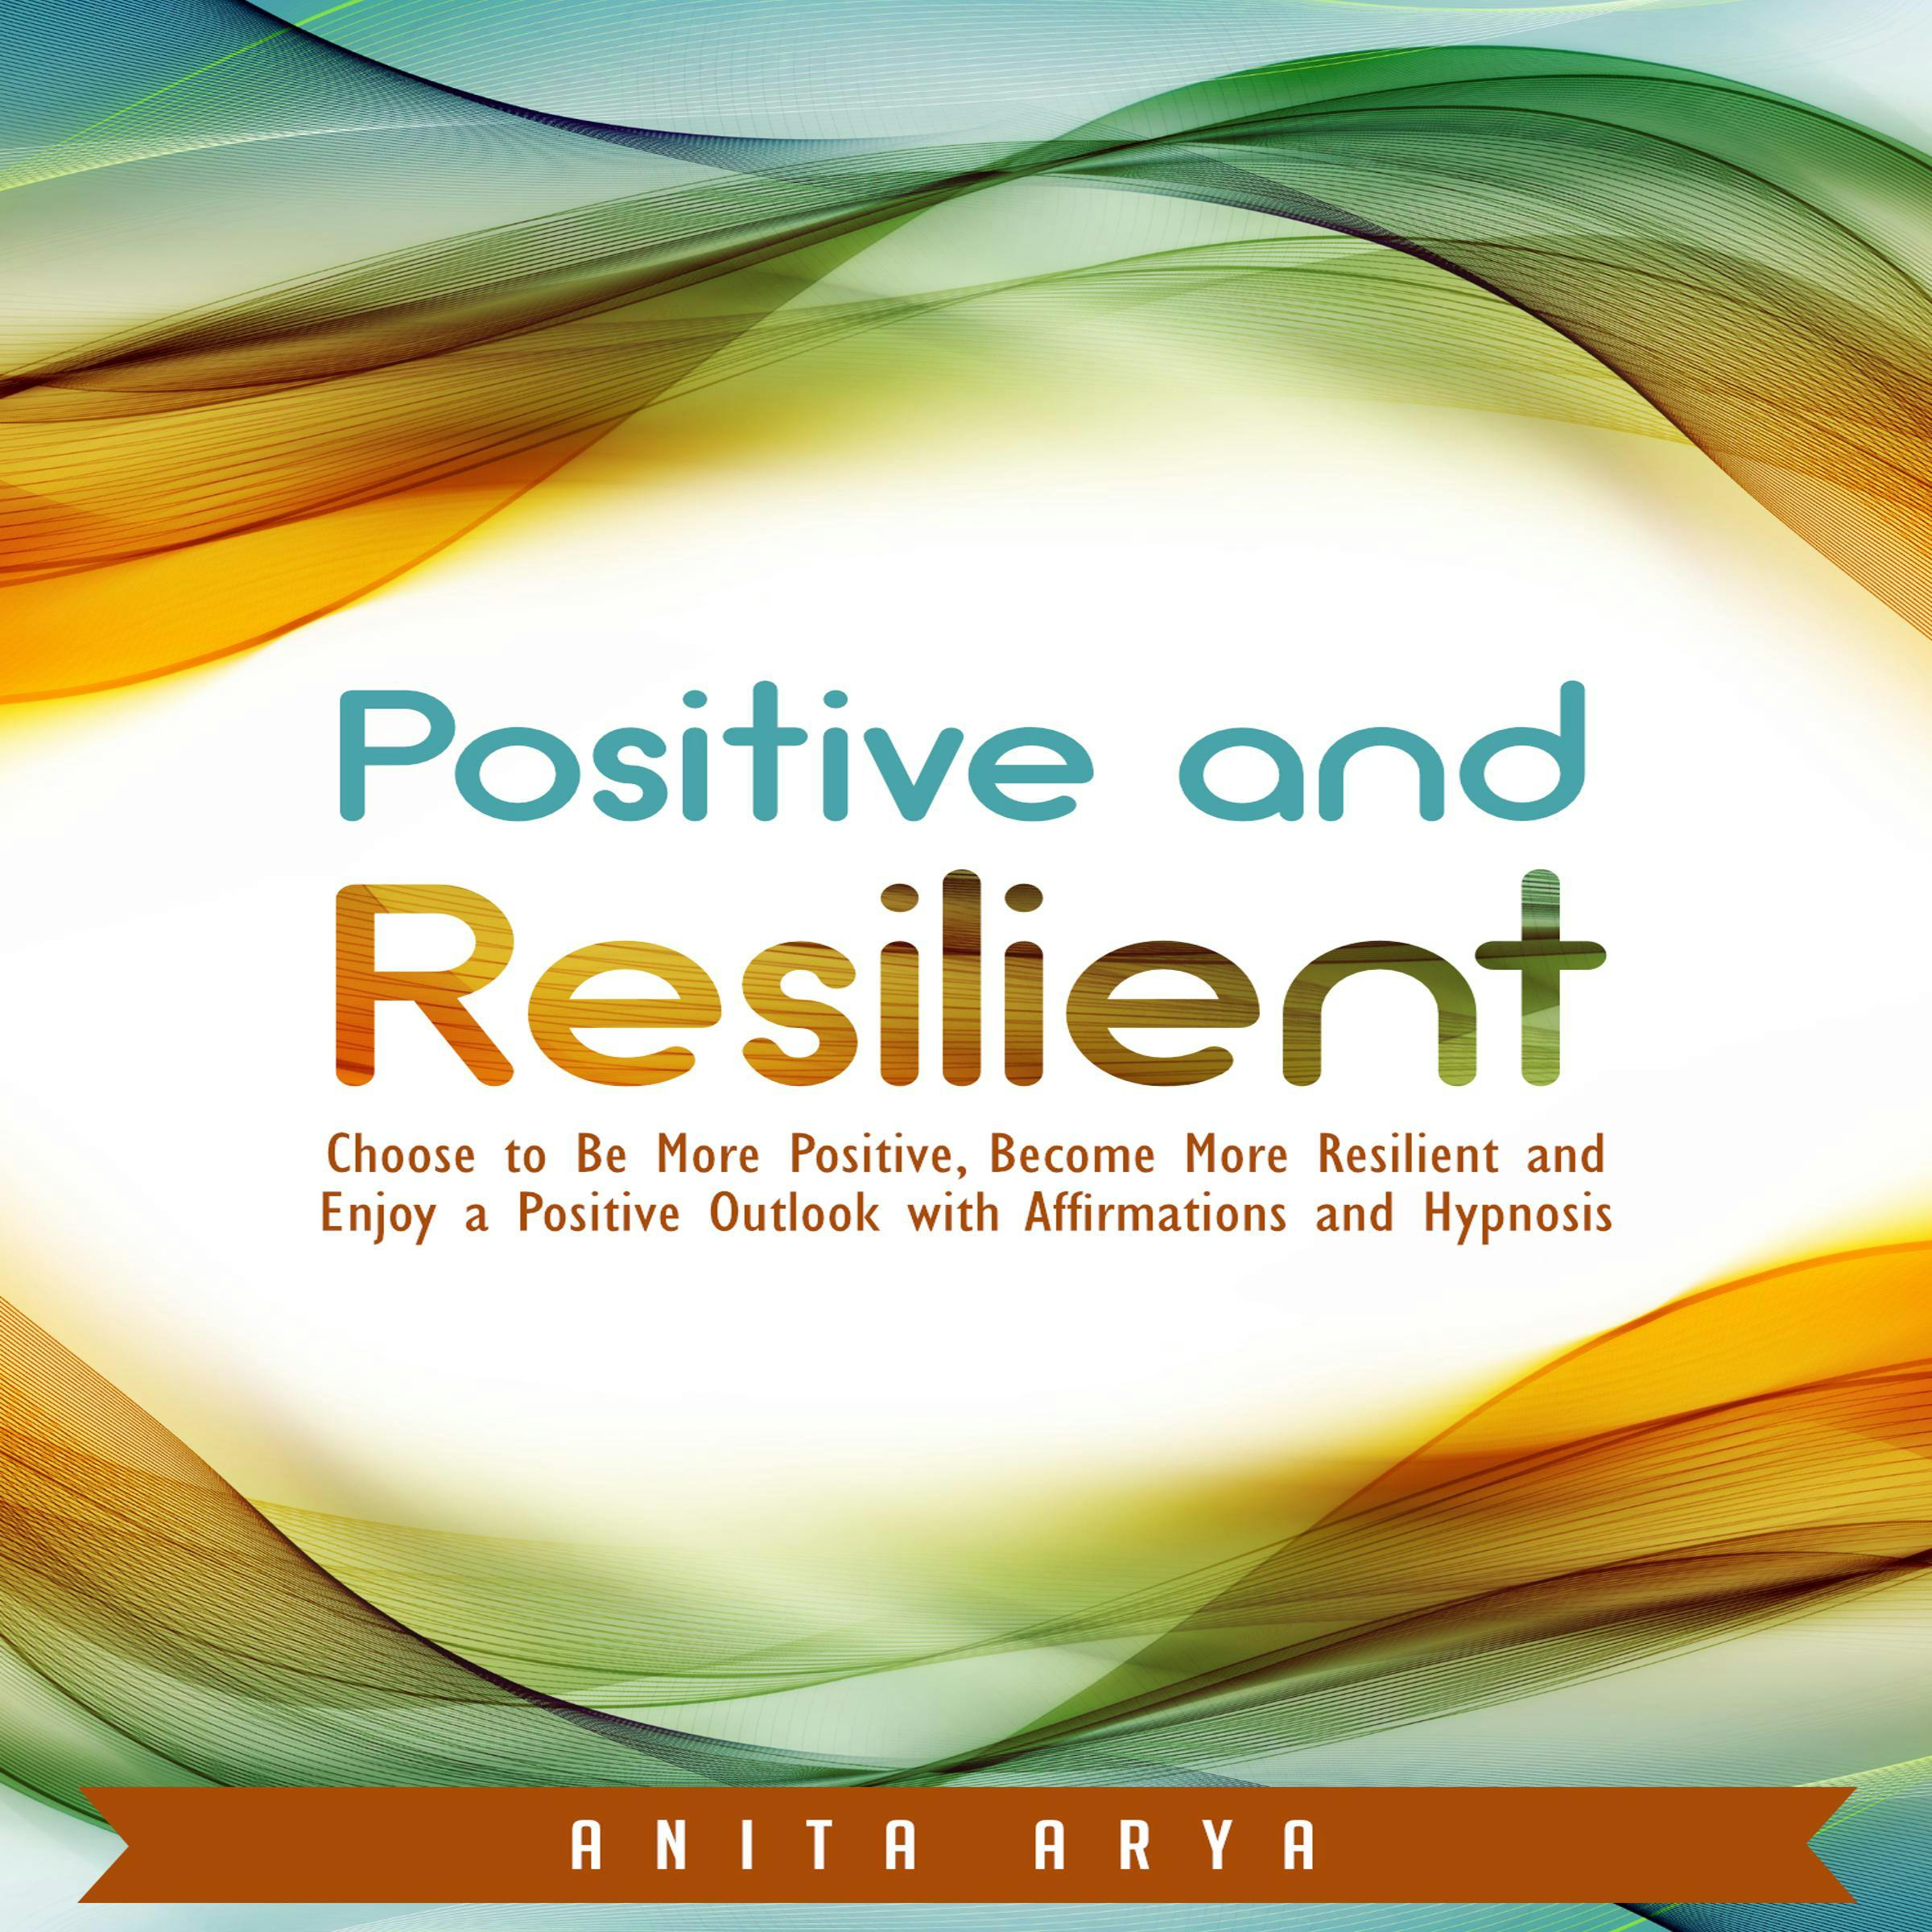 Positive and Resilient: Choose to Be More Positive, Become More Resilient and Enjoy a Positive Outlook with Affirmations and Hypnosis - Anita Arya